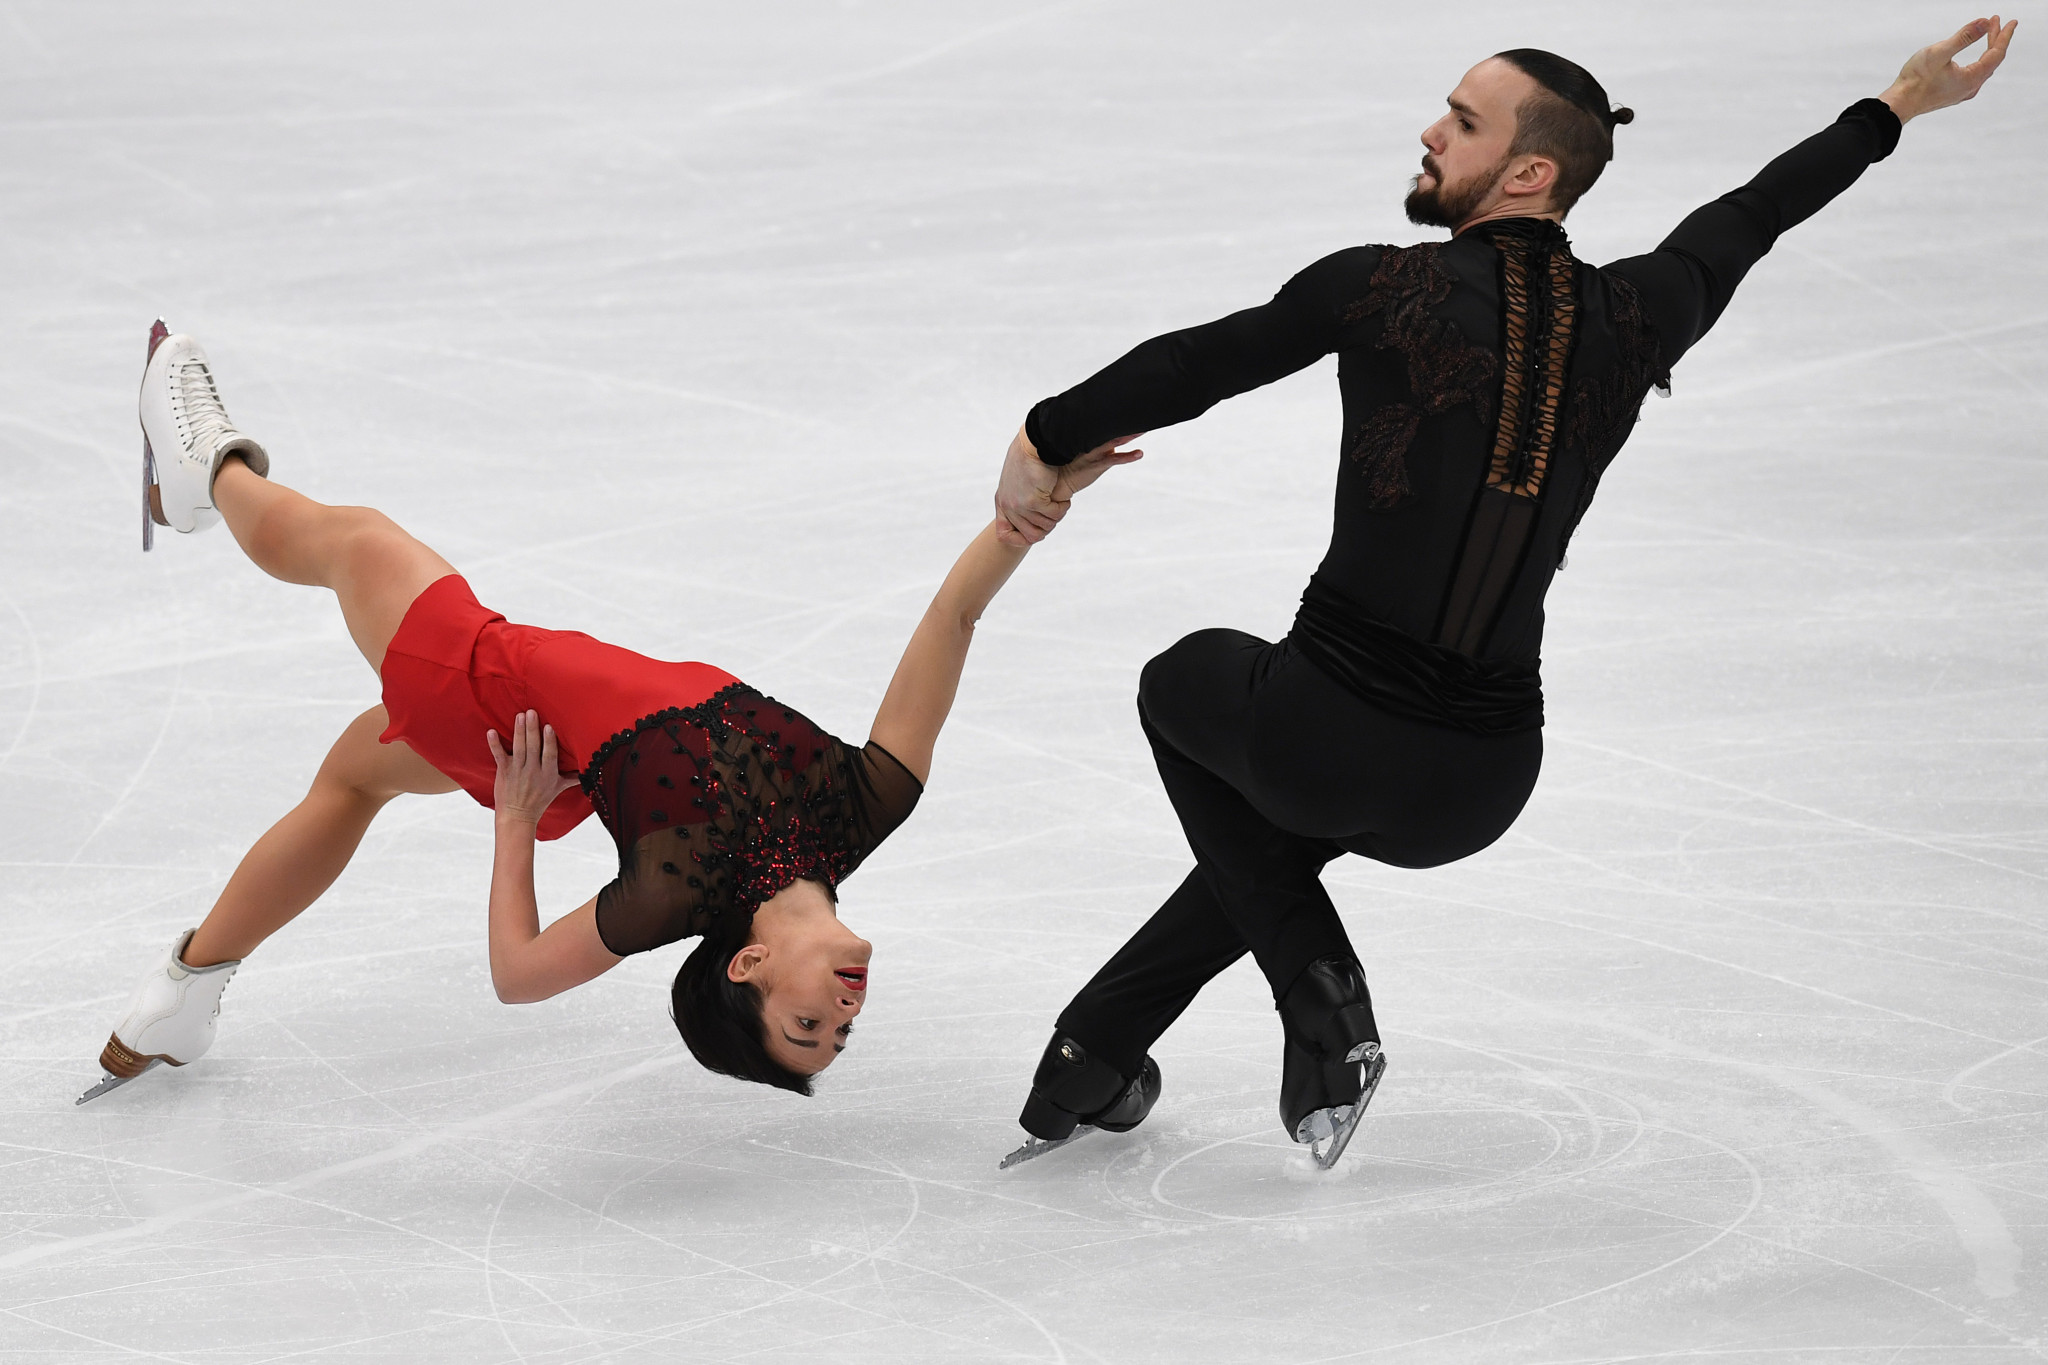 Ksenia Stolbova and Fedor Klimov were unable to compete at the Pyeongchang 2018 Winter Olympics ©Getty Images